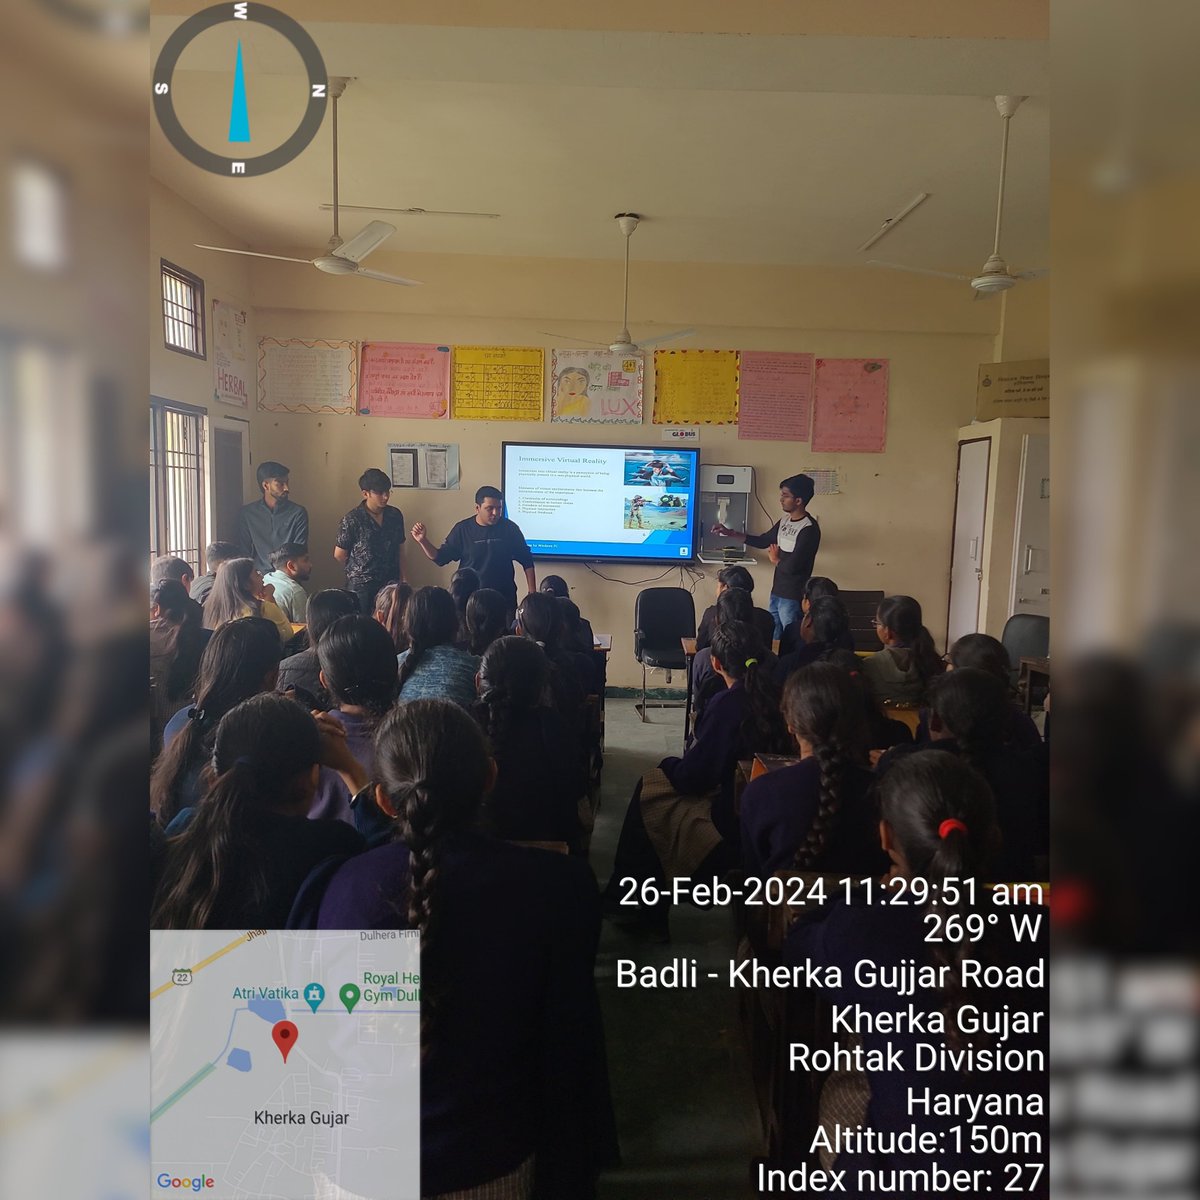 An extension activity was organized on 26-02-2024 by the Department of Computer Science and Engineering on 'Virtual Reality' at Government Girl Senior Secondary School, Dulhera.
.
.
.
#VRWorkshop #ComputerScienceEducation #CSEvent #ExtensionActivity #VirtualReality #GITAM